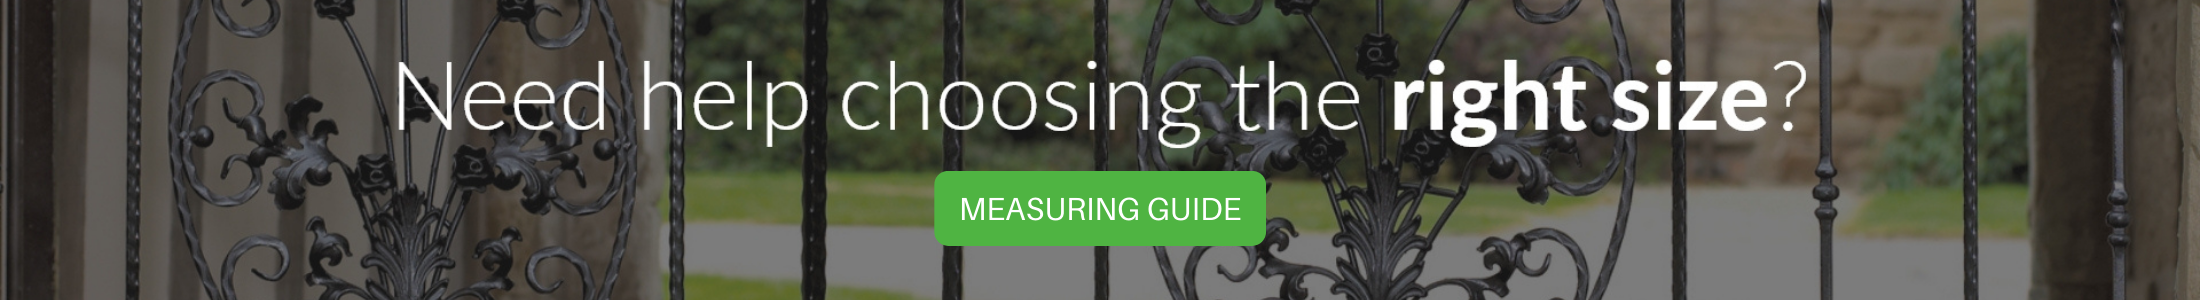 Go to the full measuring guide - Click here